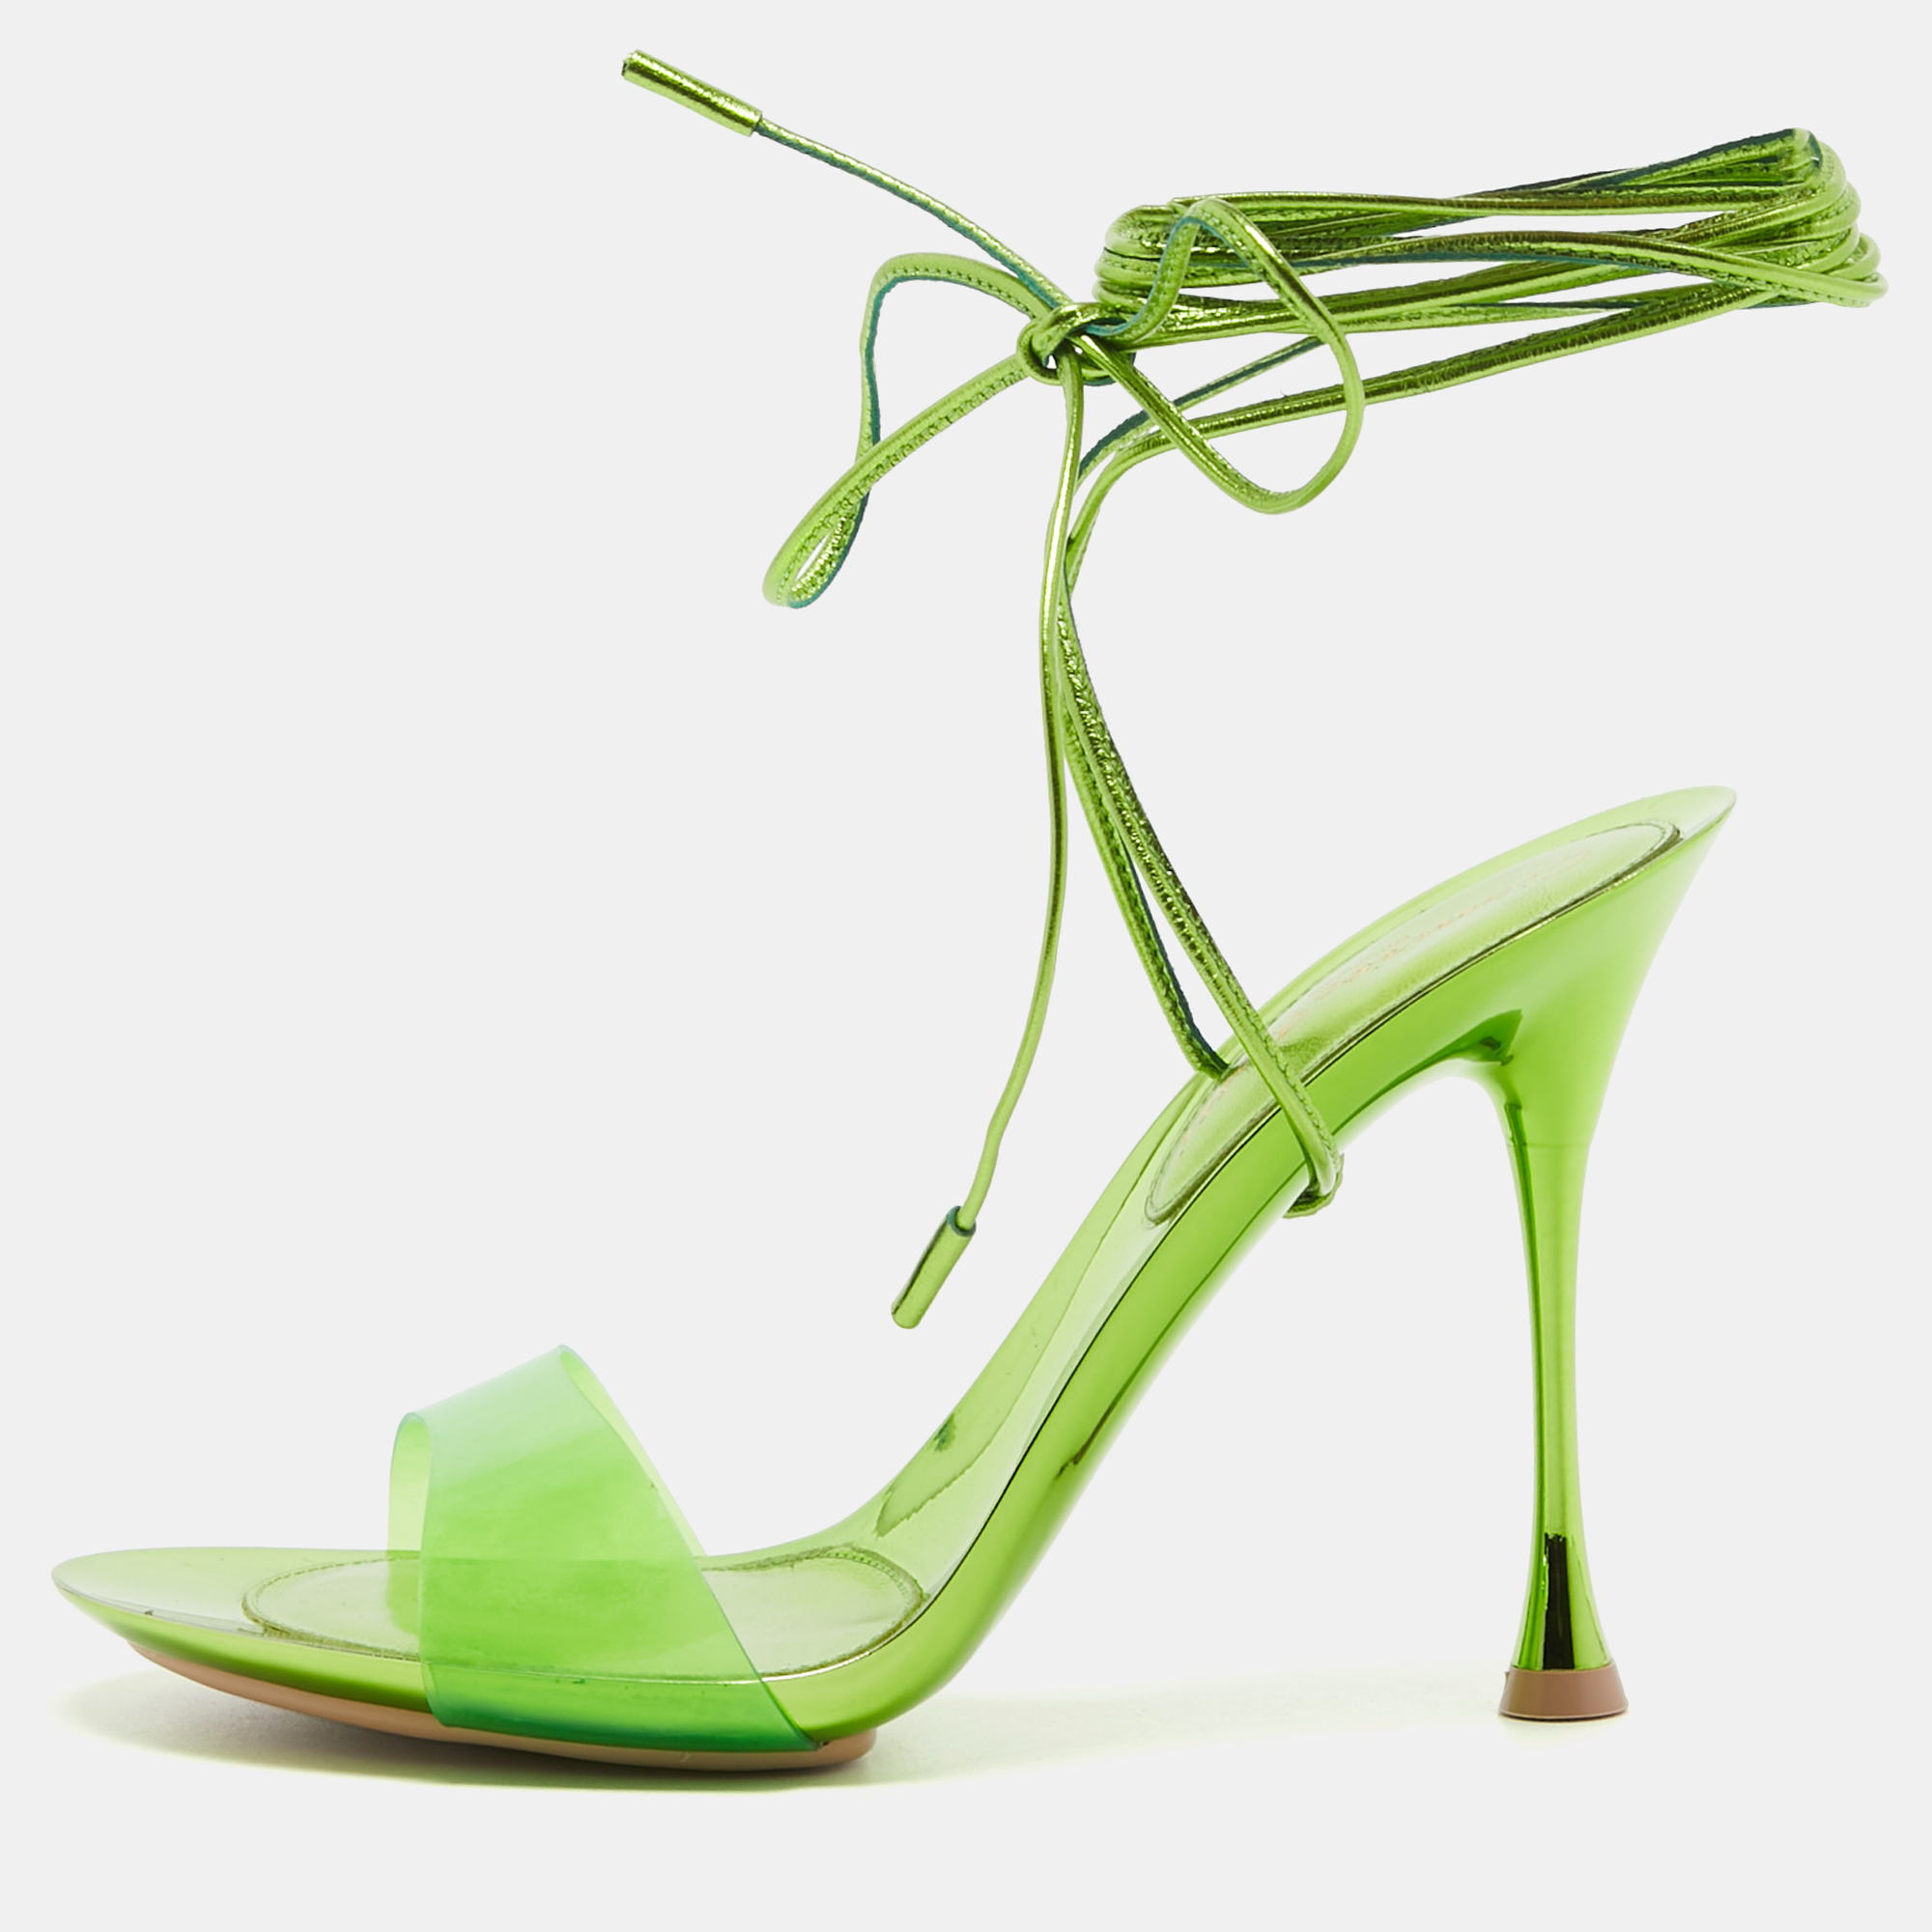 Pre-owned Gianvito Rossi Green Pvc And Leather Spice Ankle Tie Sandals Size 37